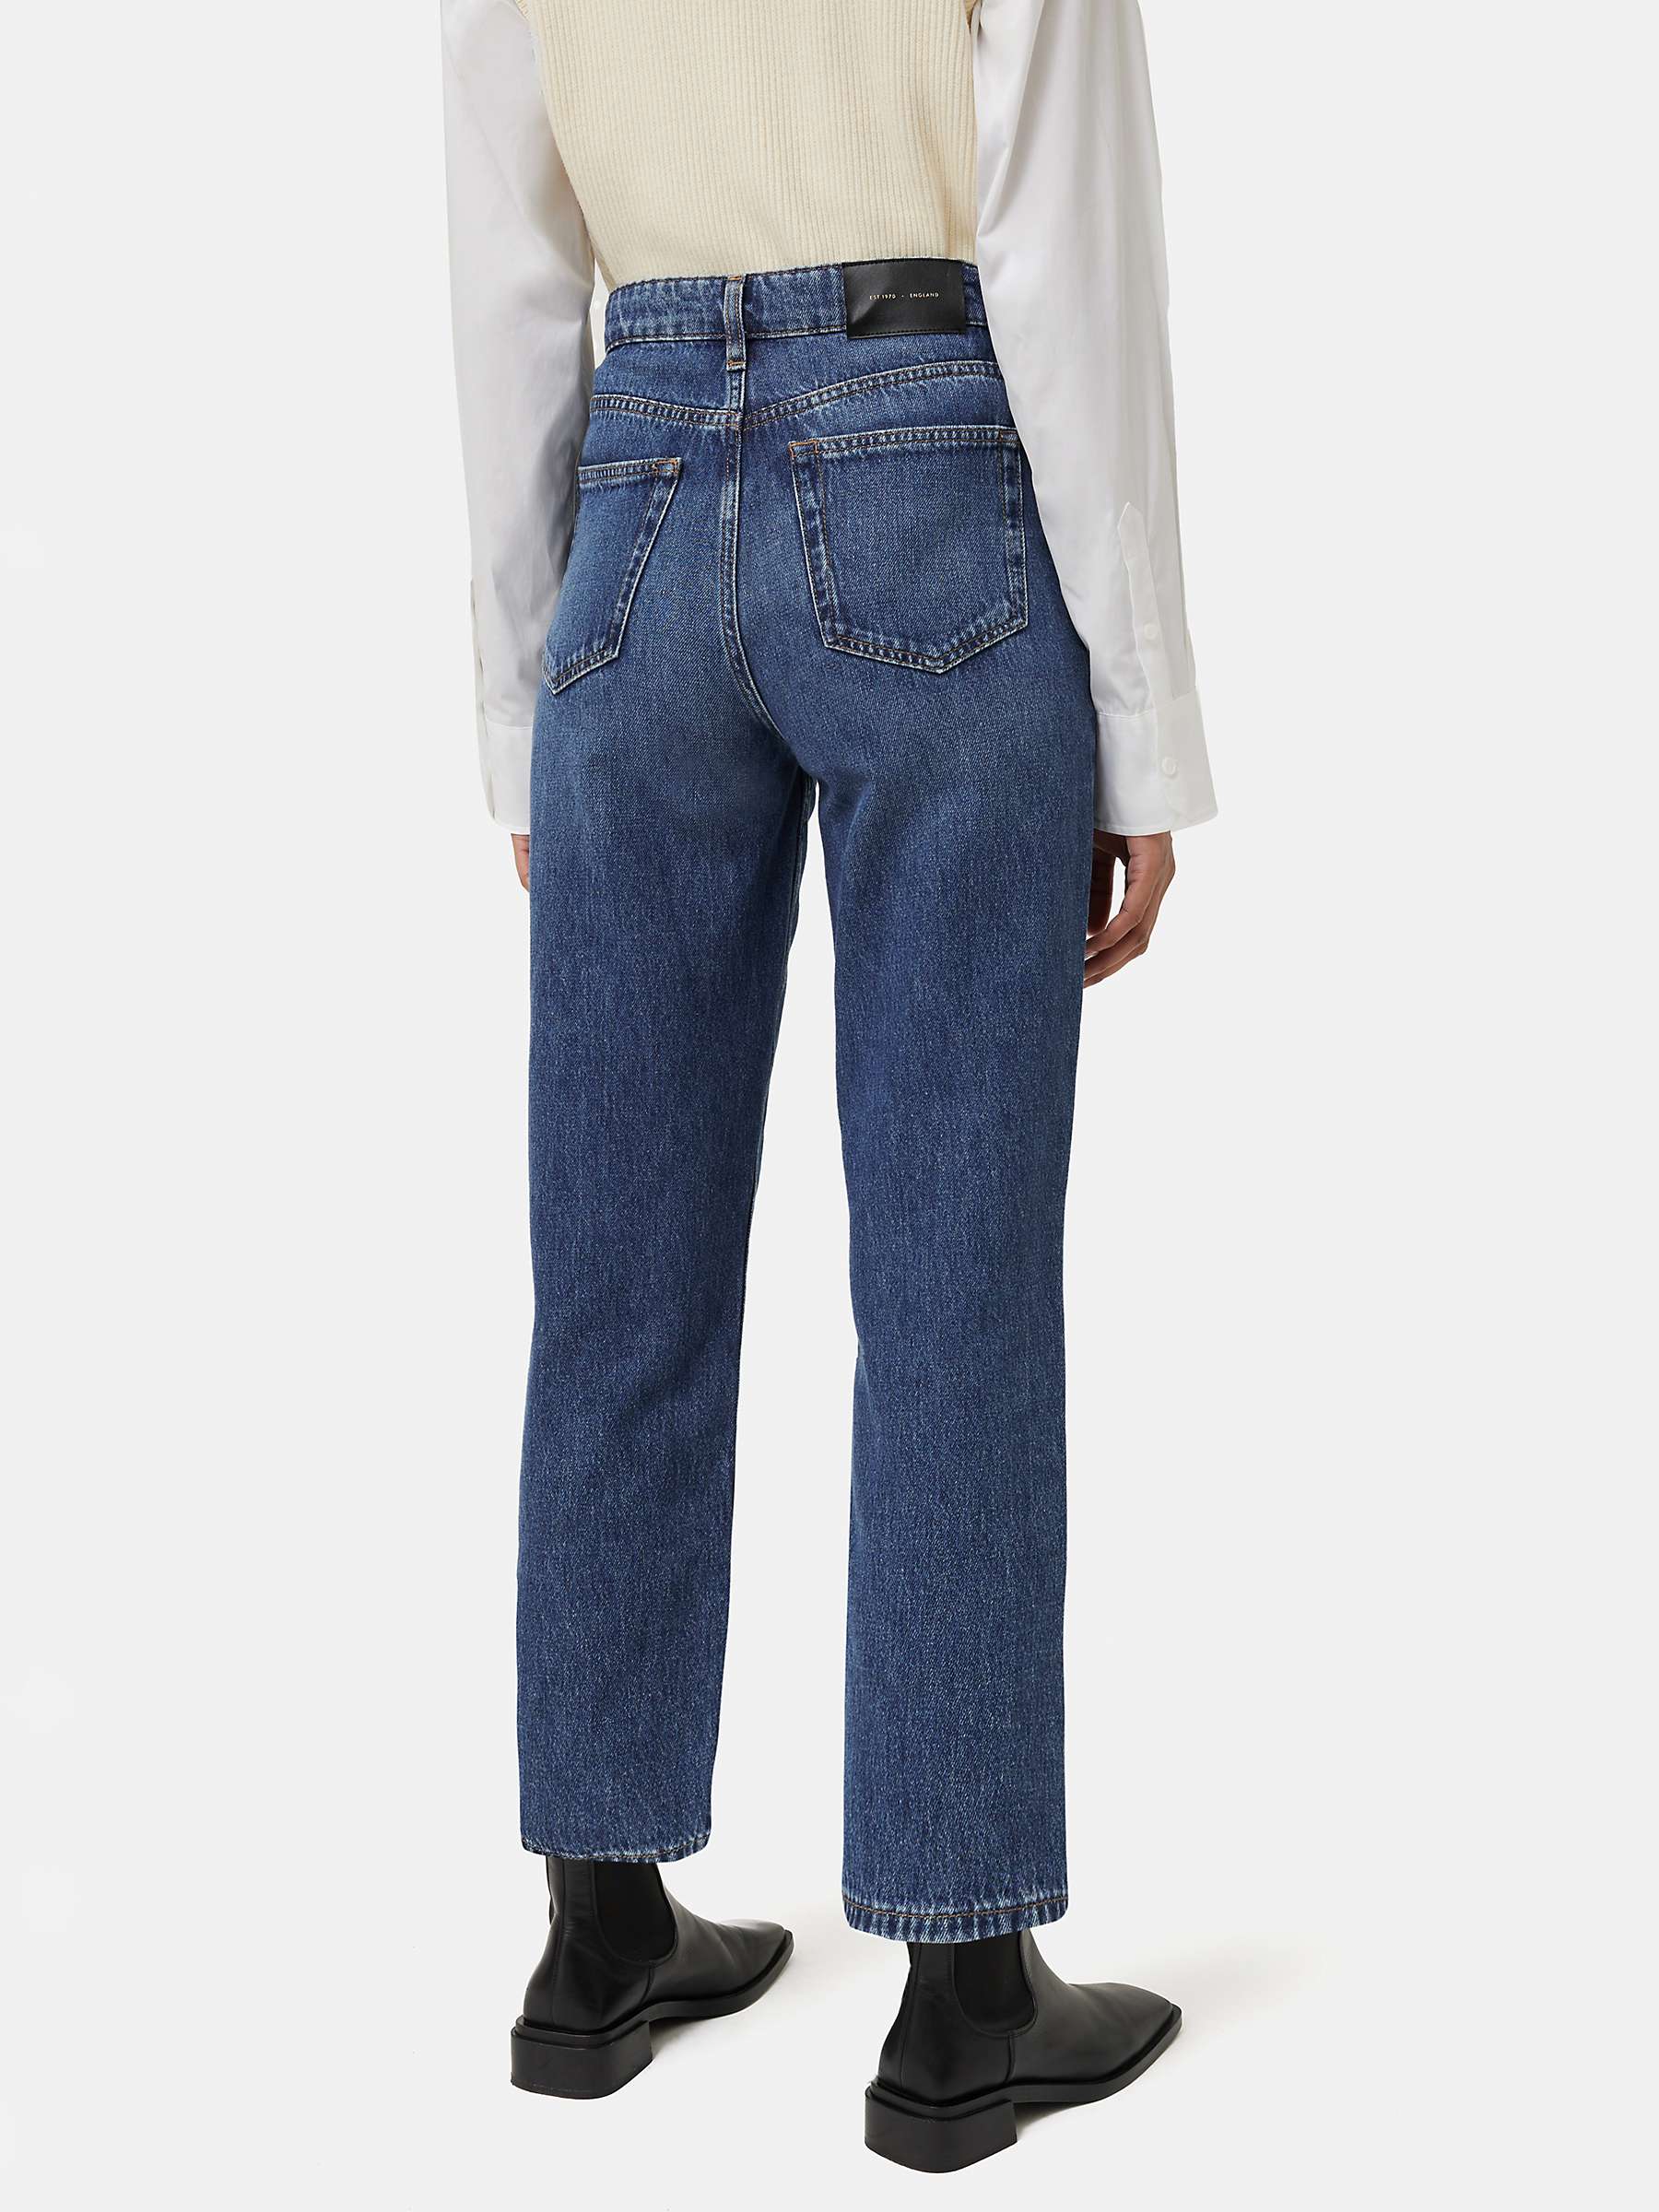 Buy Jigsaw Delmont Jeans Online at johnlewis.com